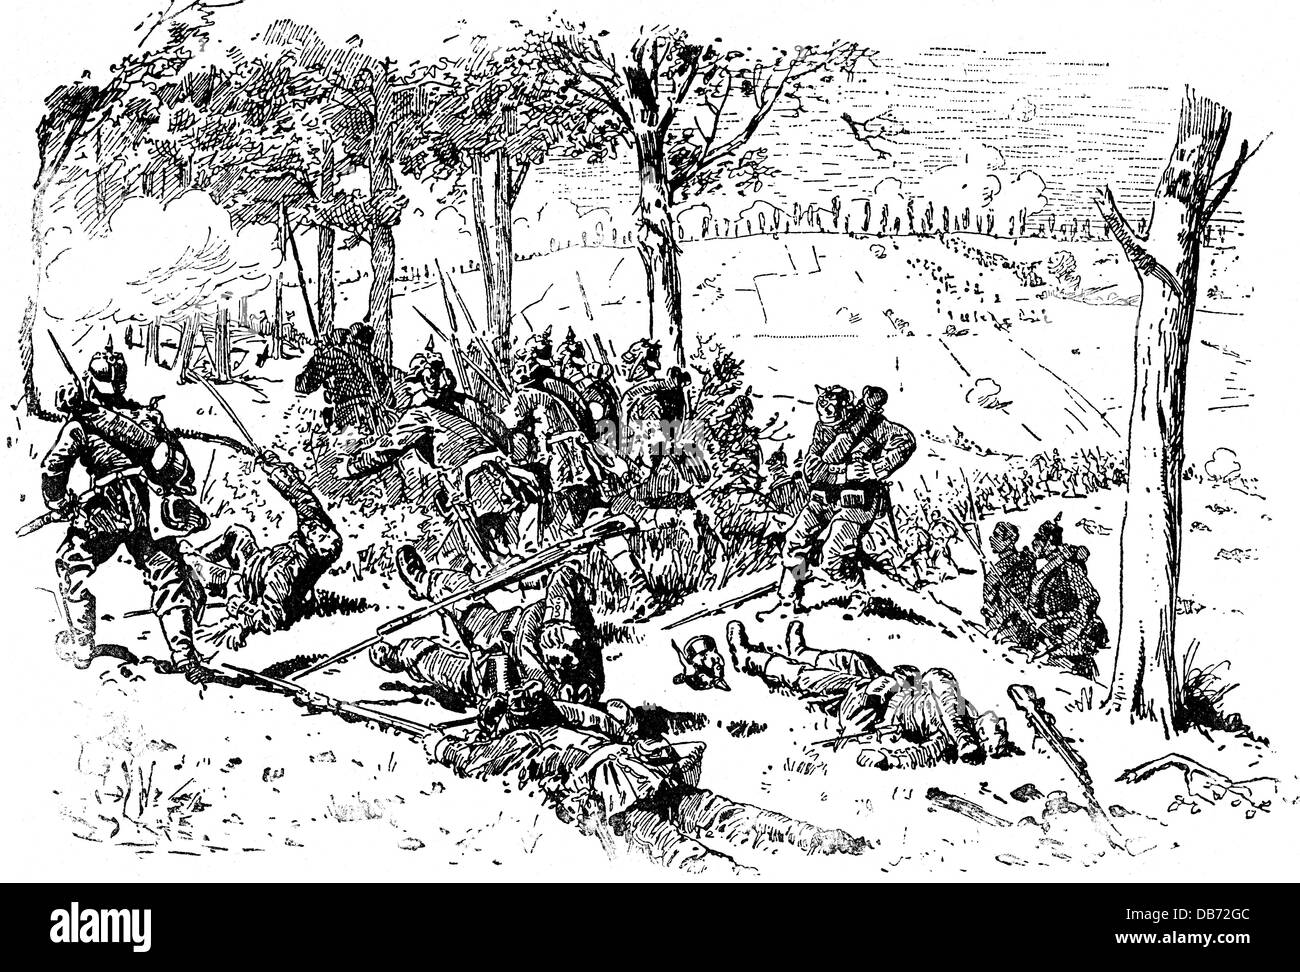 Franco-Prussian War 1870 - 1871, Battle of Colombey, 14.8.1870, attacking Prussian infantry, wood engraving, late 19th century, Prussian, Prussians, soldiers, soldier, charge, attack, attacks, touch, 1st army, Germans, German, Franco Prussian, war, wars, Colombey-Nouilly, Colombey - Nouilly, Lorraine, France, historic, historical, people, Additional-Rights-Clearences-Not Available Stock Photo